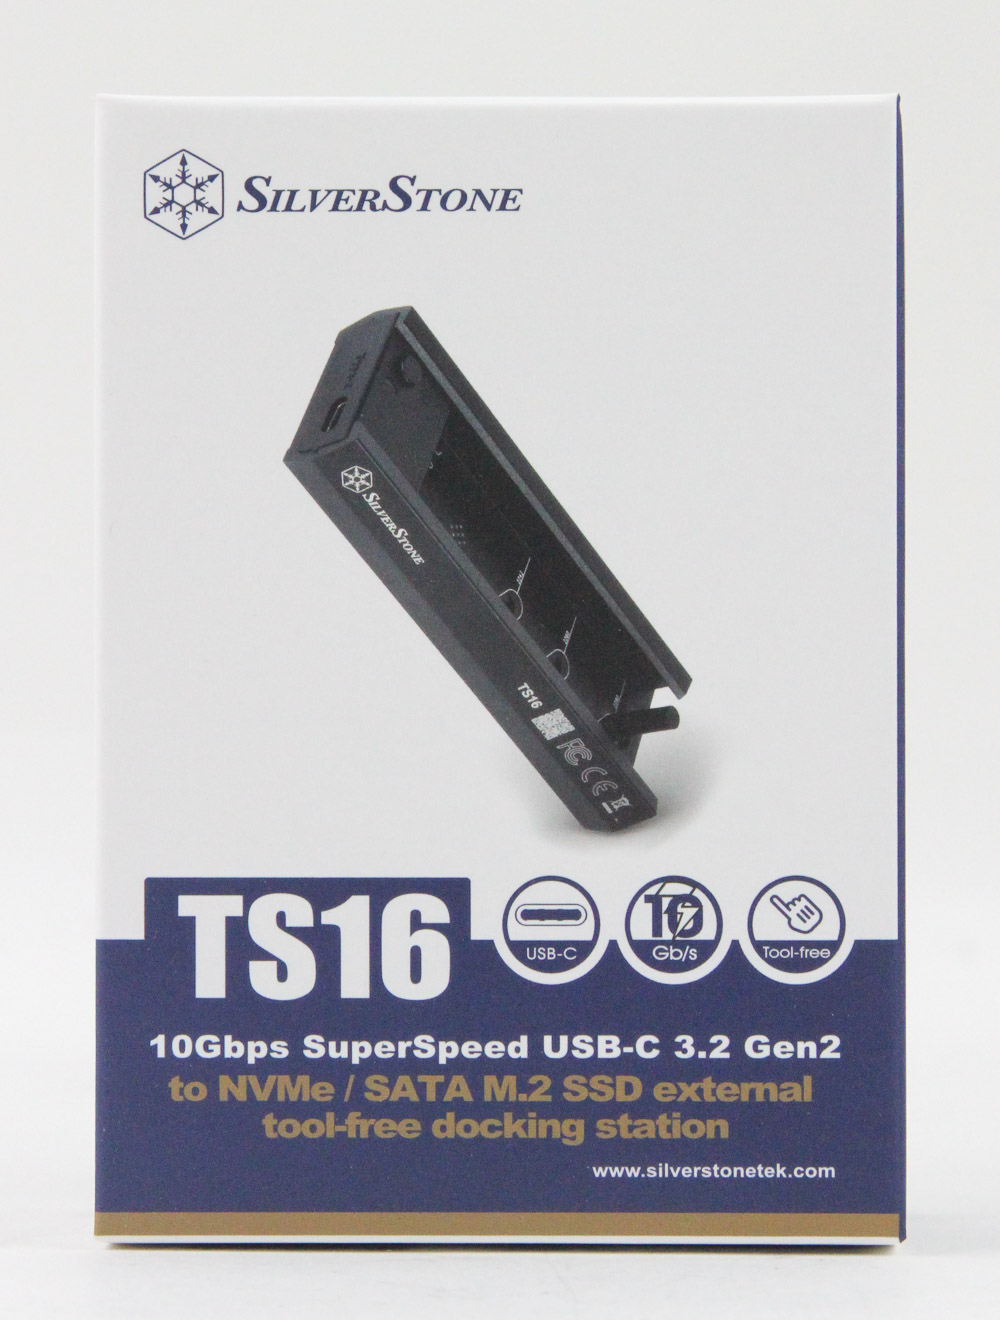 Quick Look: Silverstone TS16 SSD to USB-C External Docking Station